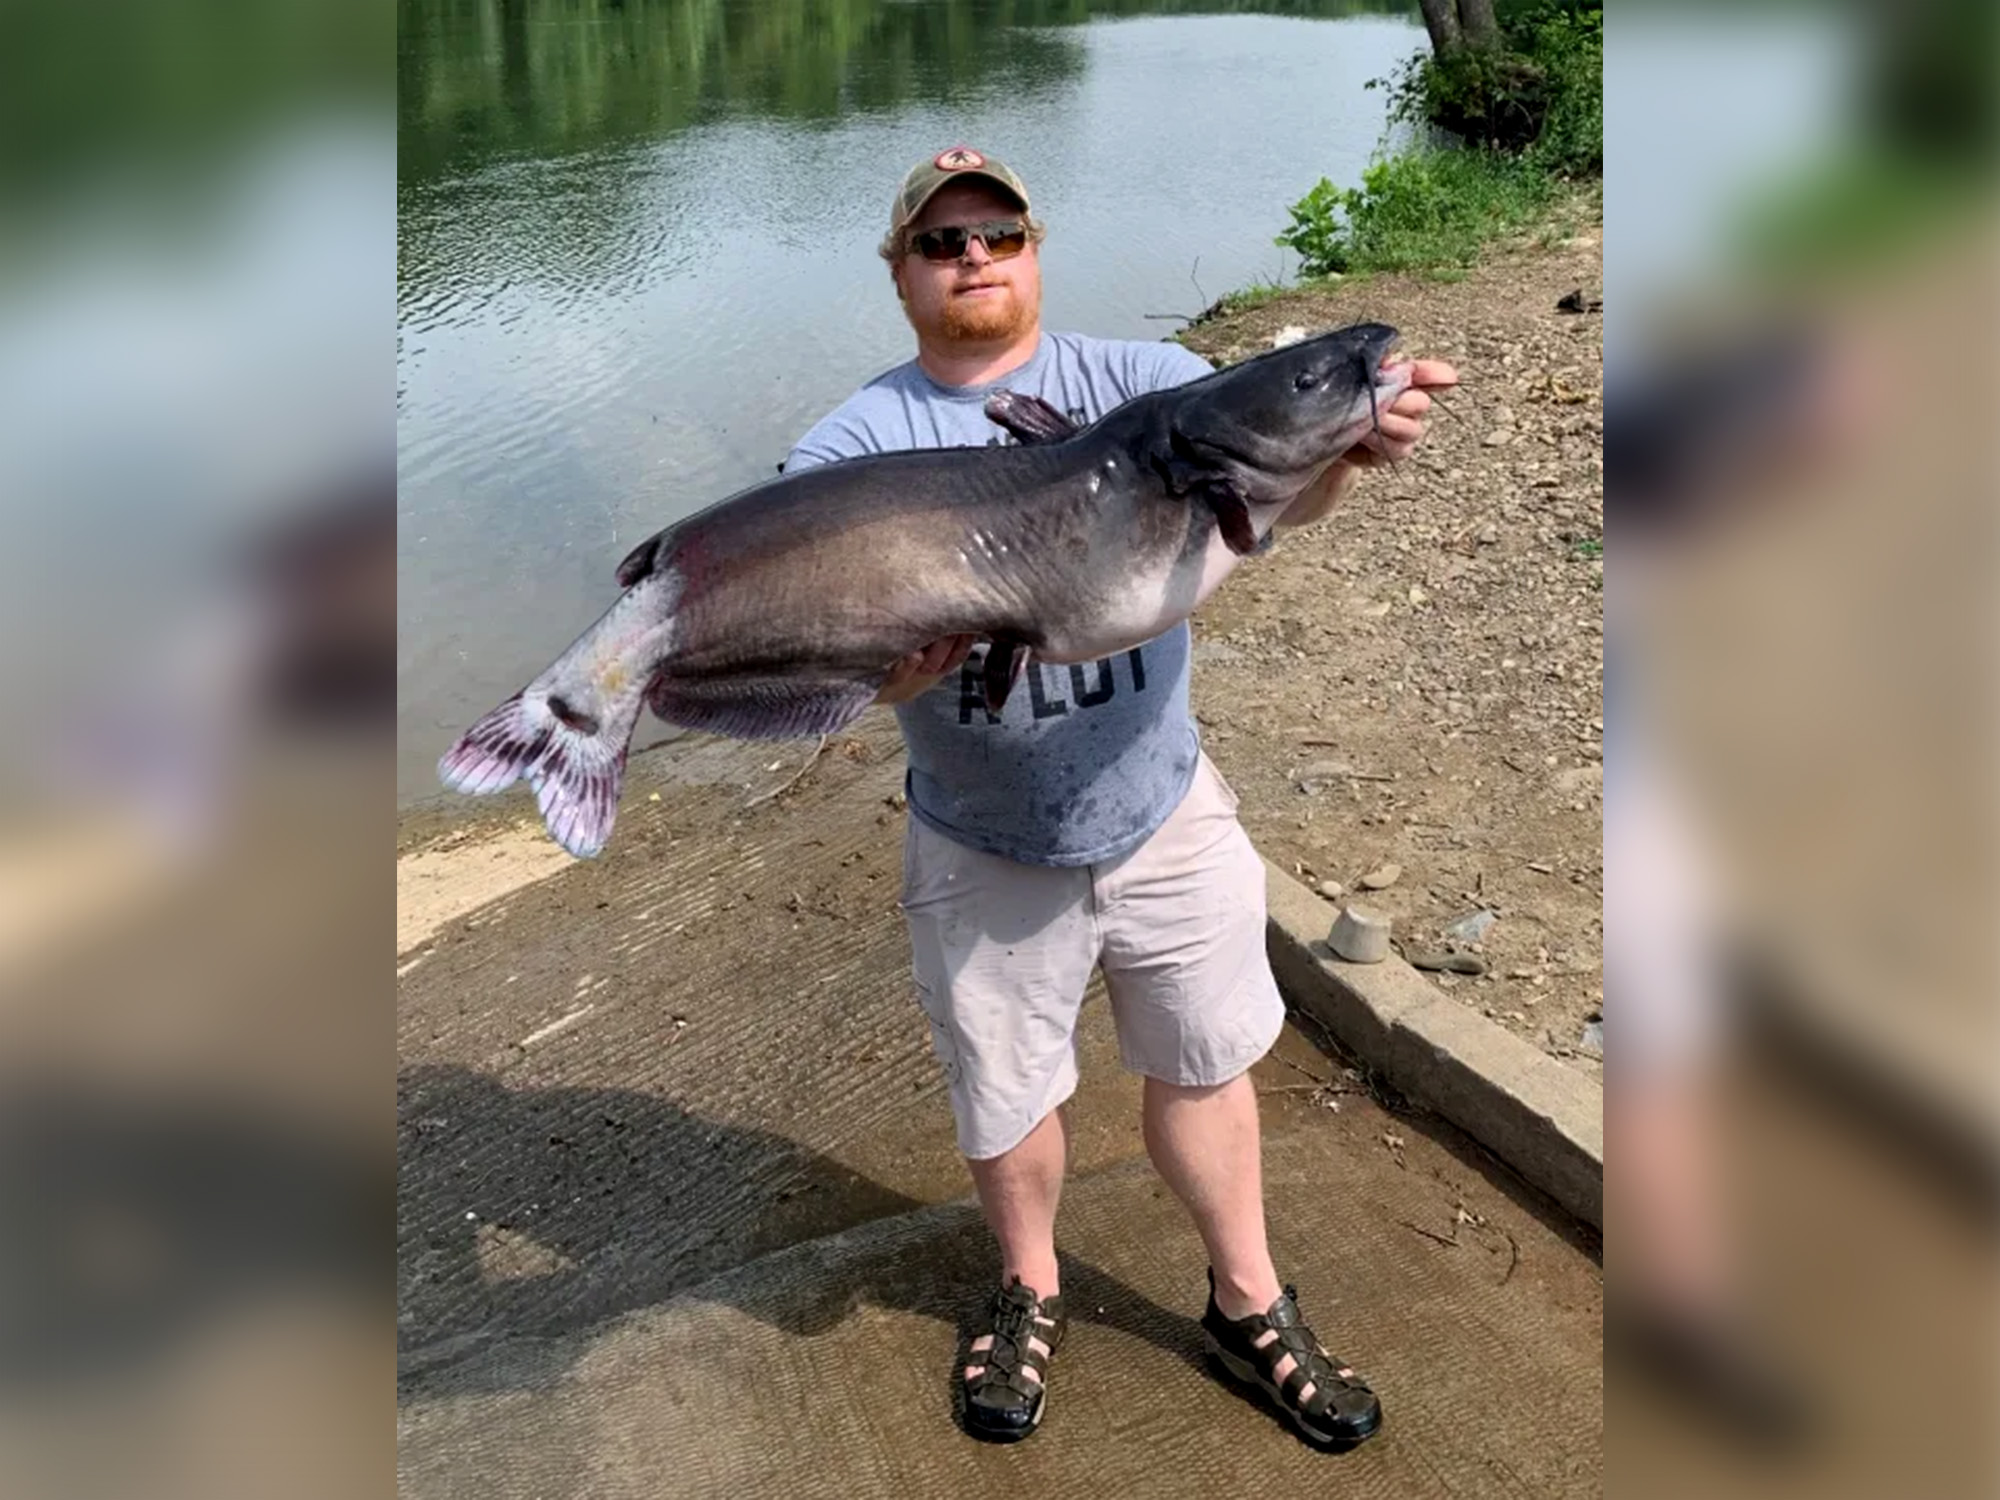 Fishing Report: Blue catfish making a comeback; tough angling in